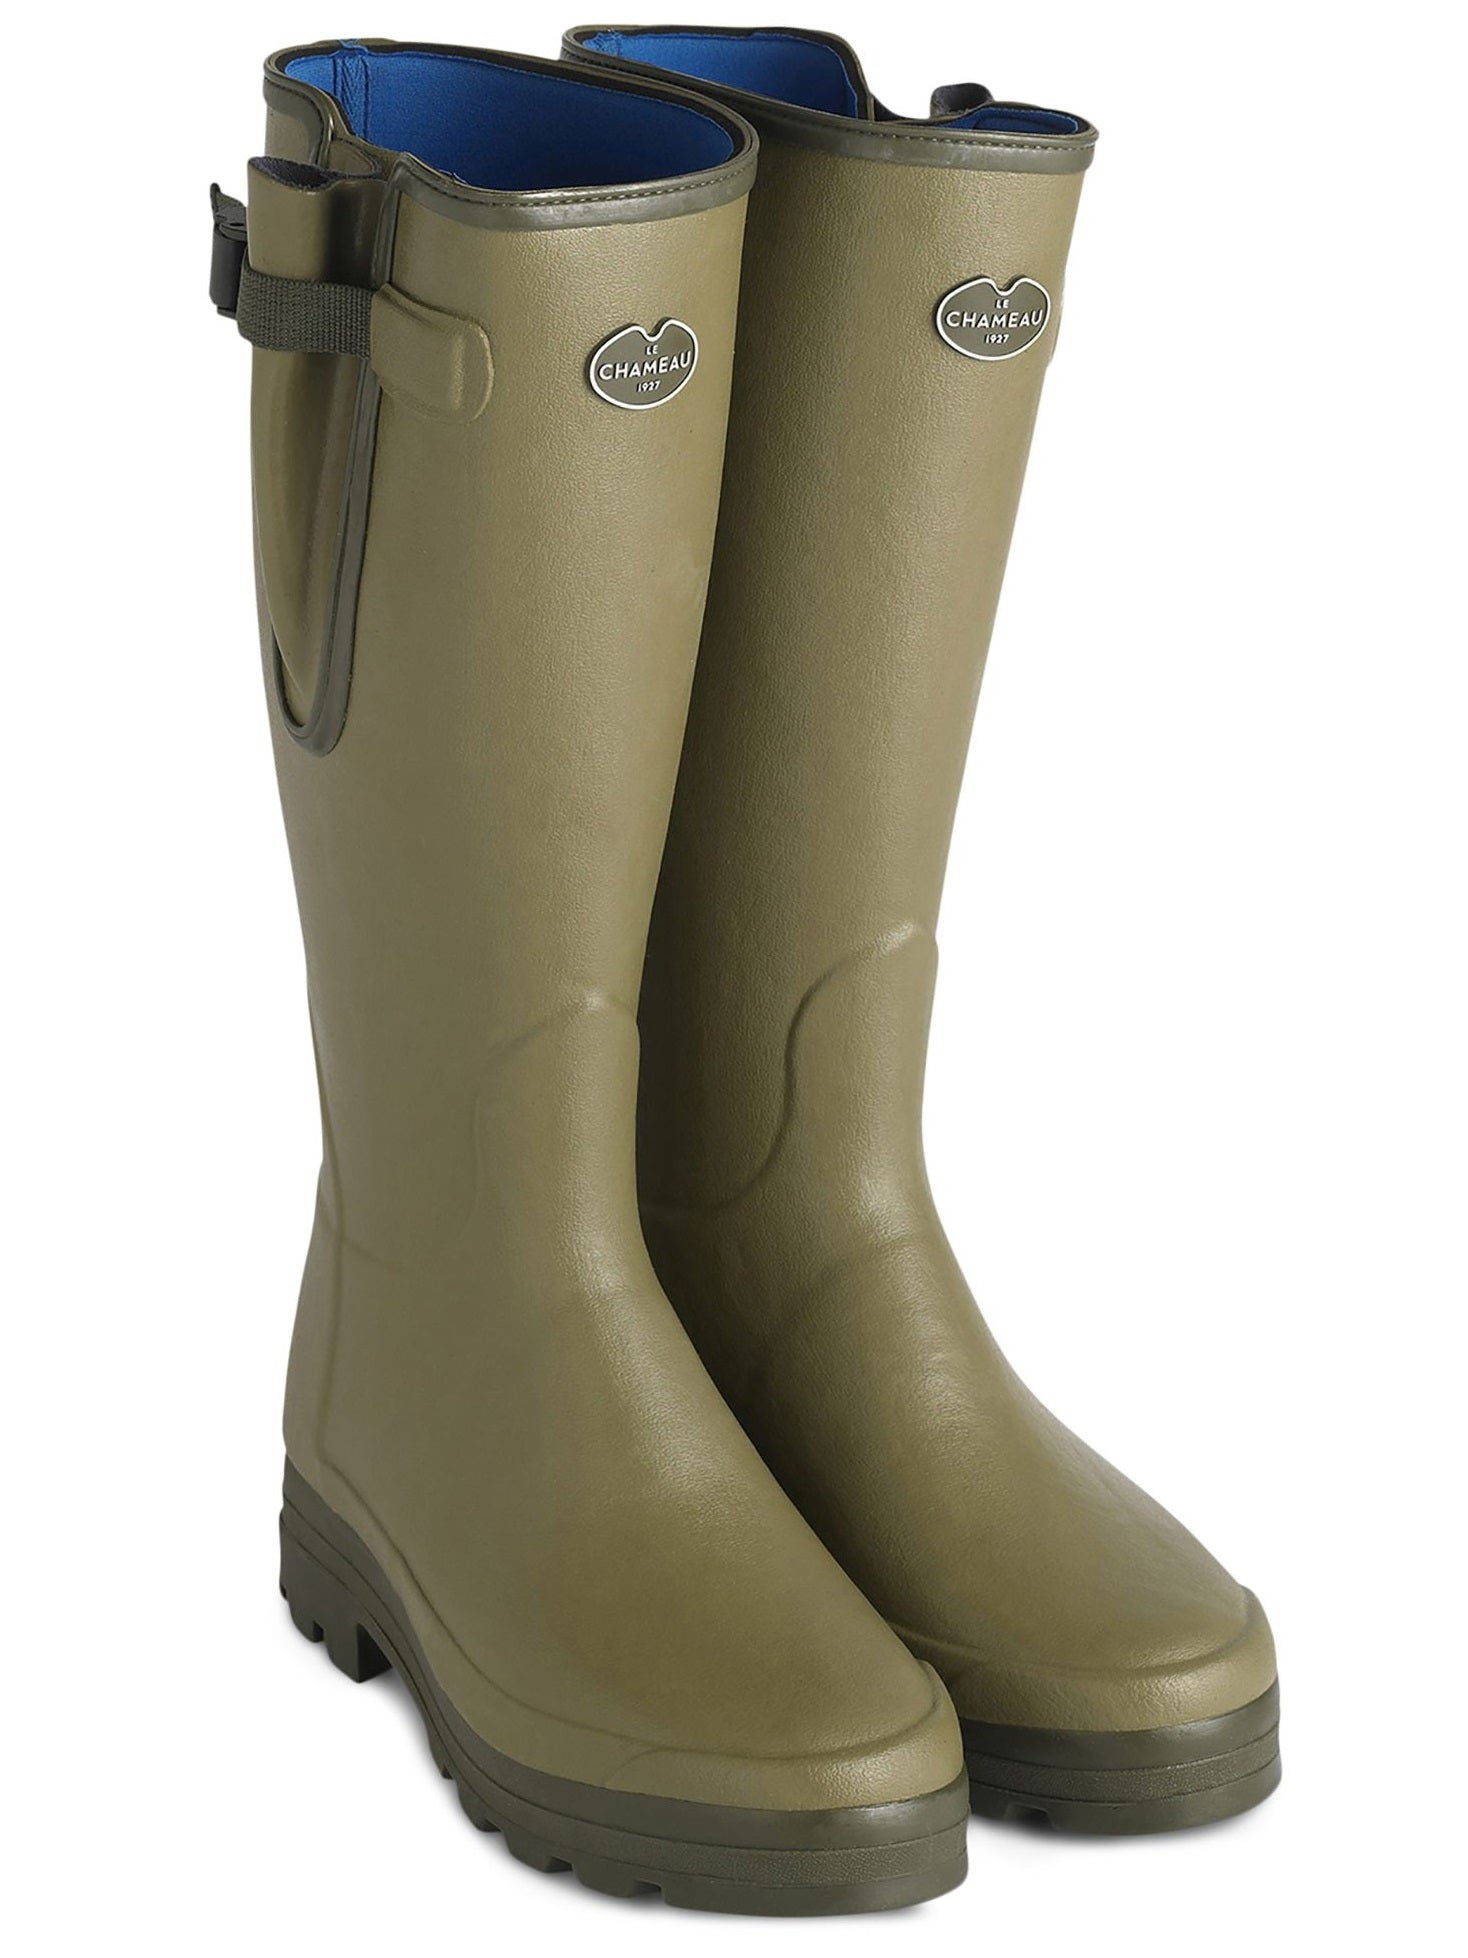 LE CHAMEAU Vierzonord XL Wide Calf Boots - Mens Neoprene Lined - Iconic Green